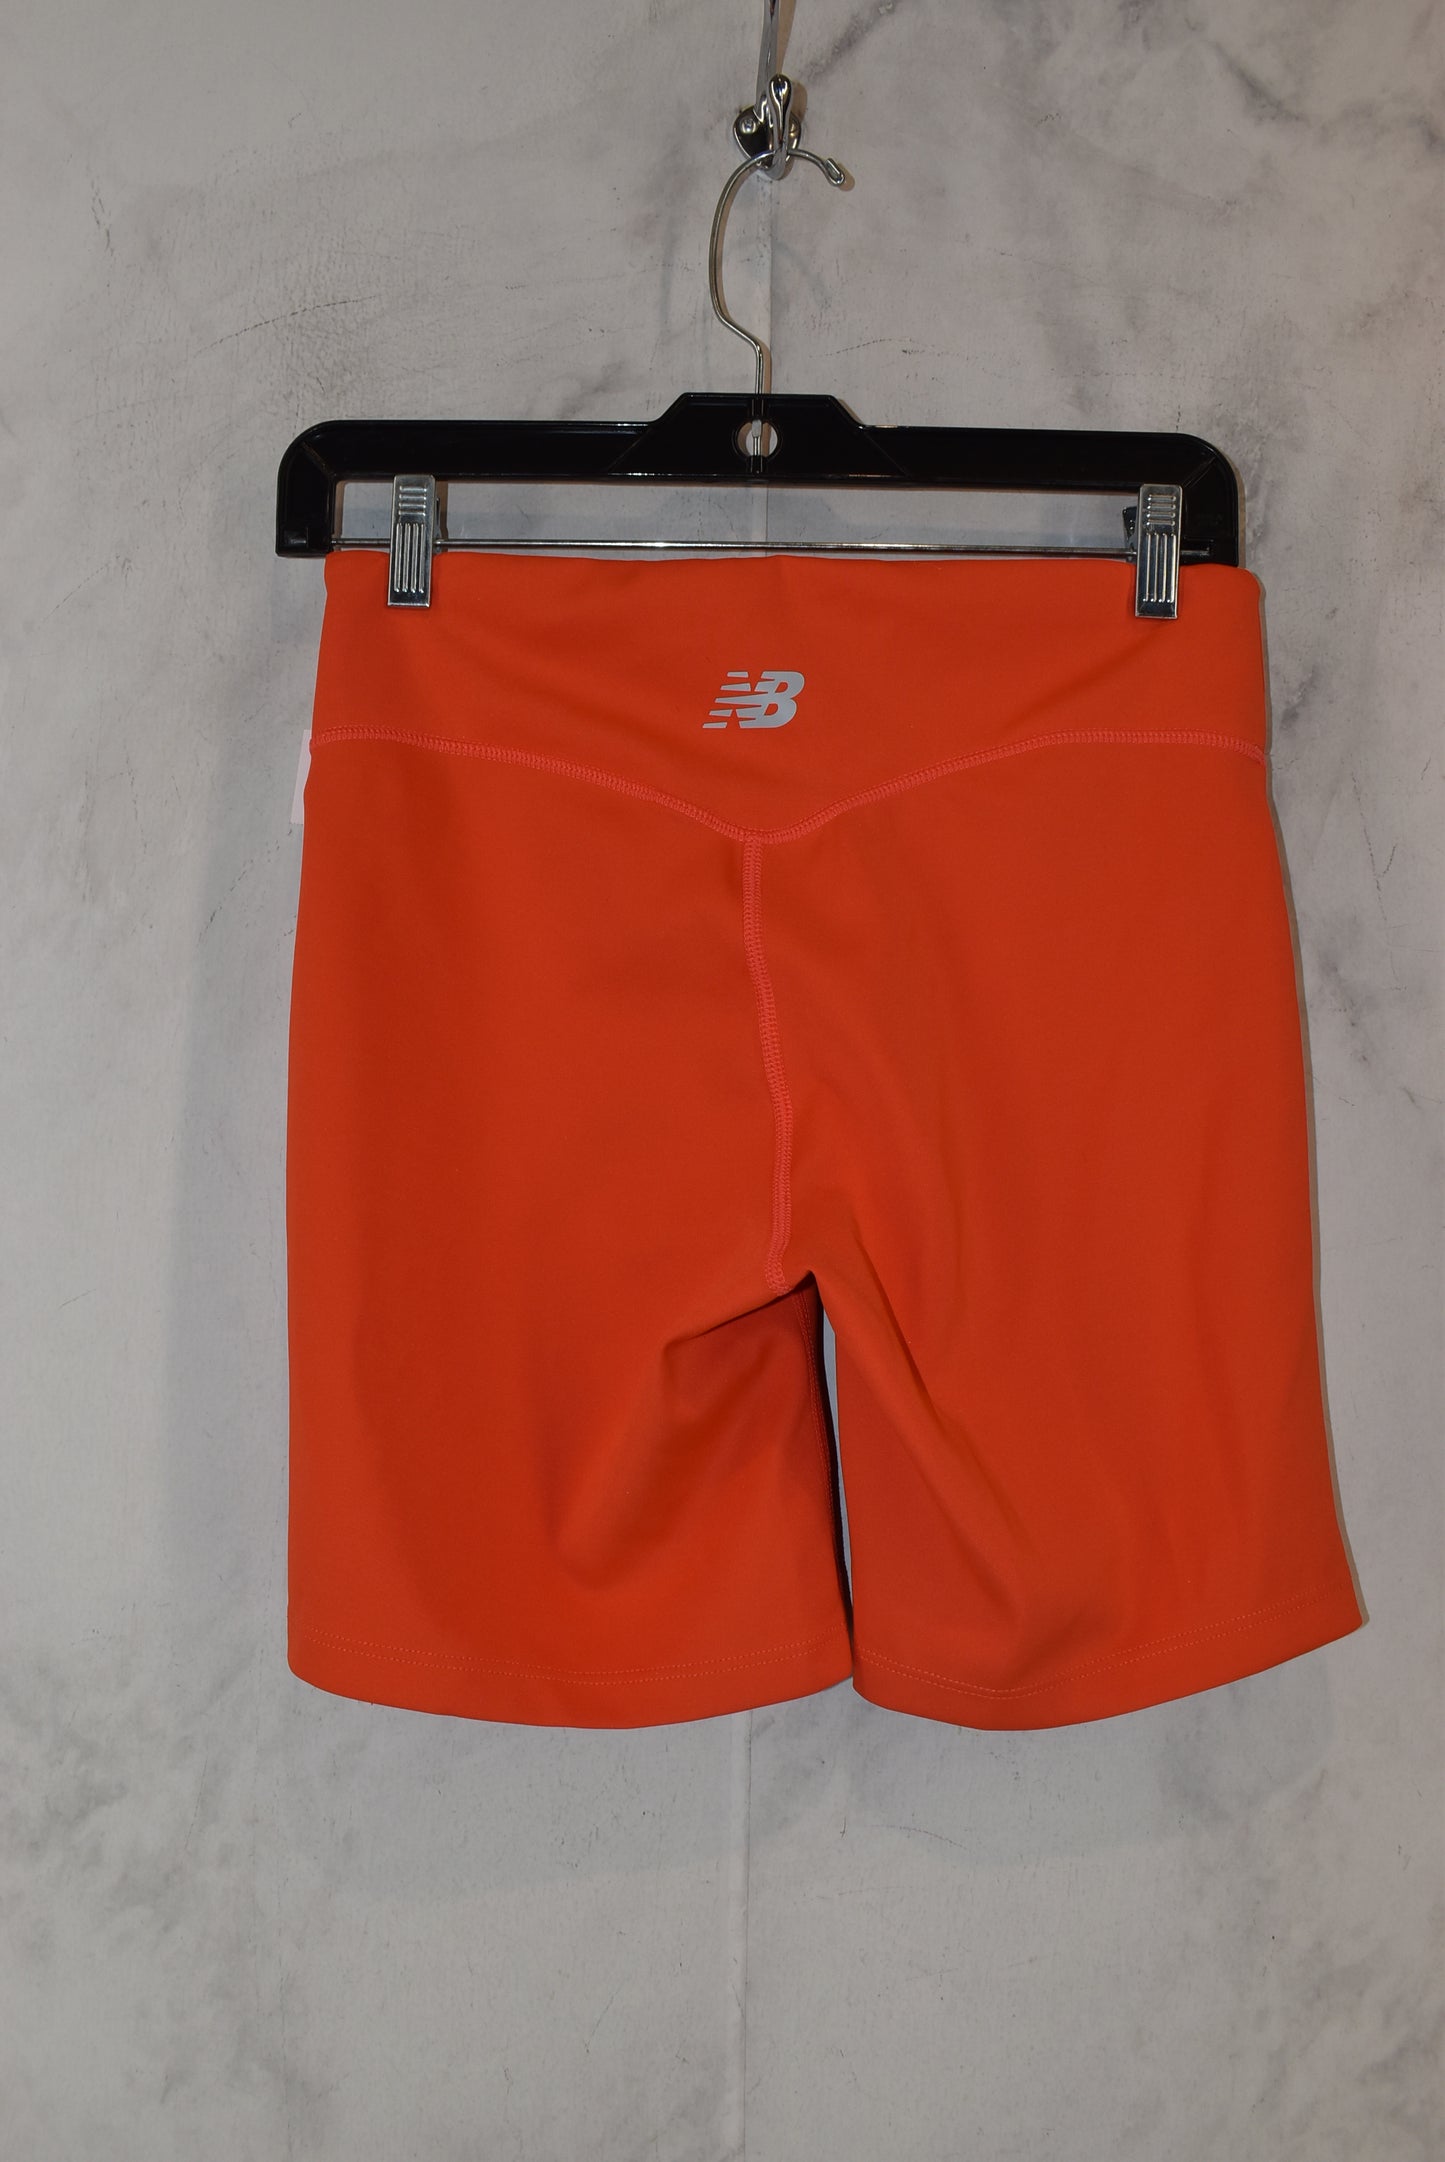 Athletic Shorts By New Balance  Size: M